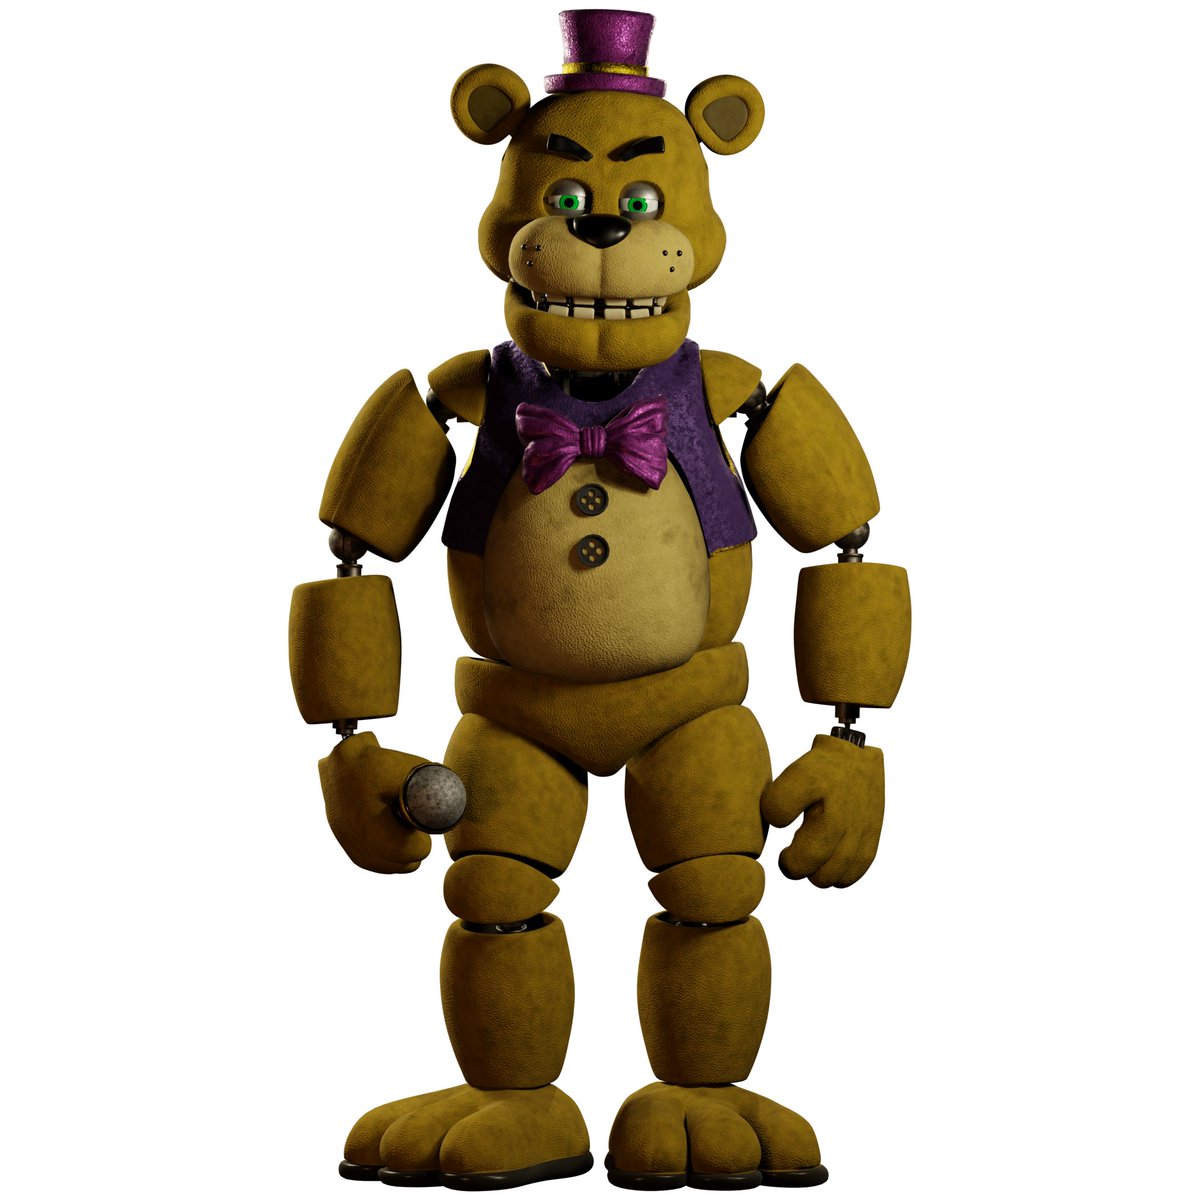 WIP for Foxy! He still needs some work on the arms and on the mats, but it's turning out pretty well!
I've been fixing the old Fredbear model, since you guys really liked it! so it's gonna be Fredbear V4! ^^ Stay tuned for more!
#FNAFMovie #FNaF #foxyfnaf #3d #Fredbear #blender3d